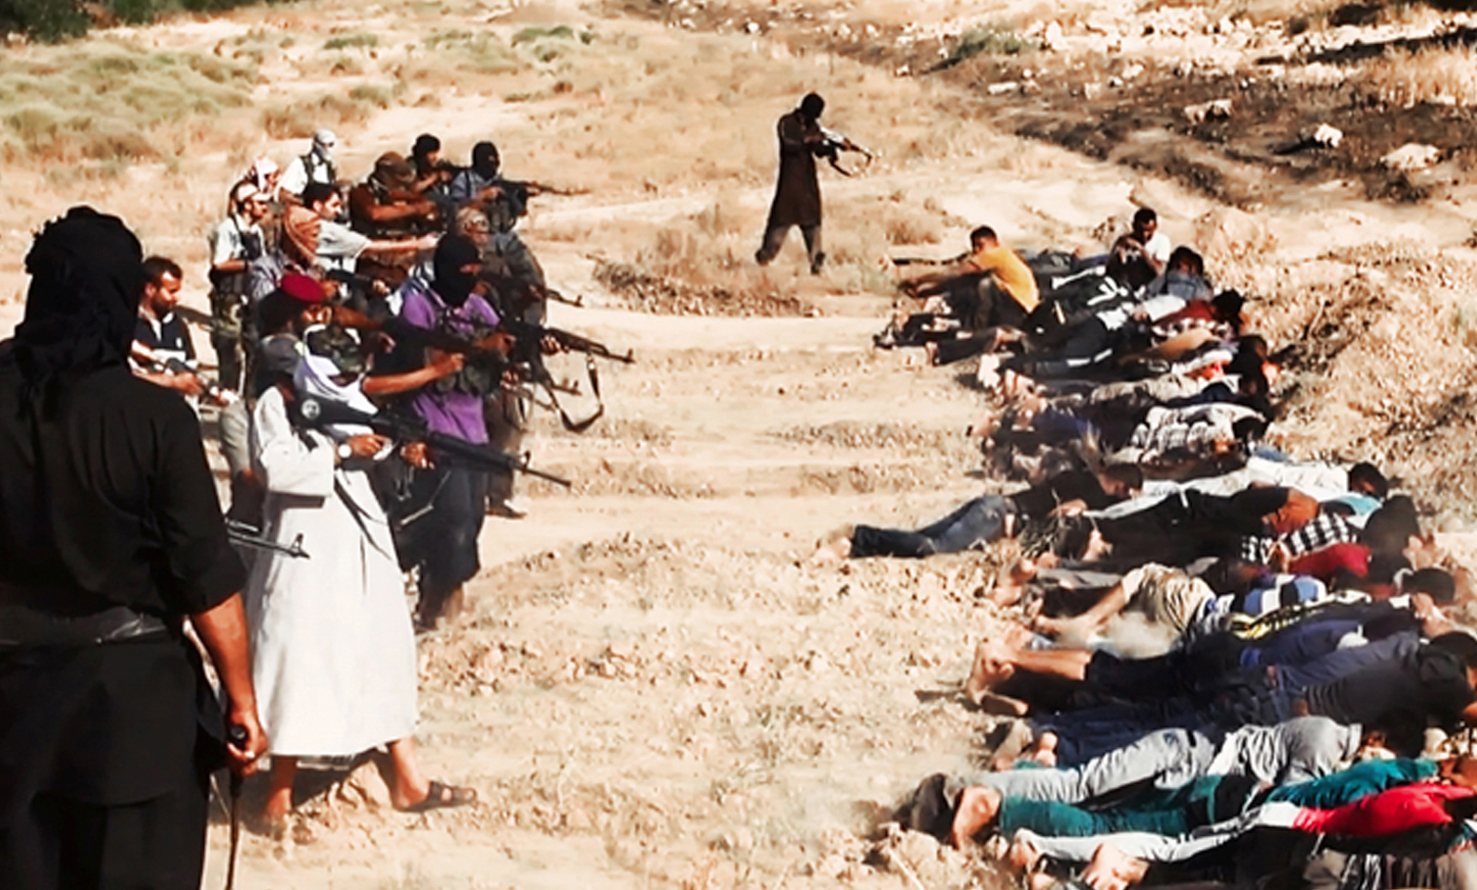 Image posted on a militant website on June 14, 2014, which has been verified and is consistent with other AP reporting, appears to show militants from the al-Qaida-inspired Islamic State of Iraq and the Syria (ISIS) taking aim at captured Iraqi soldiers wearing plain clothes after taking over a base in Tikrit, Iraq.